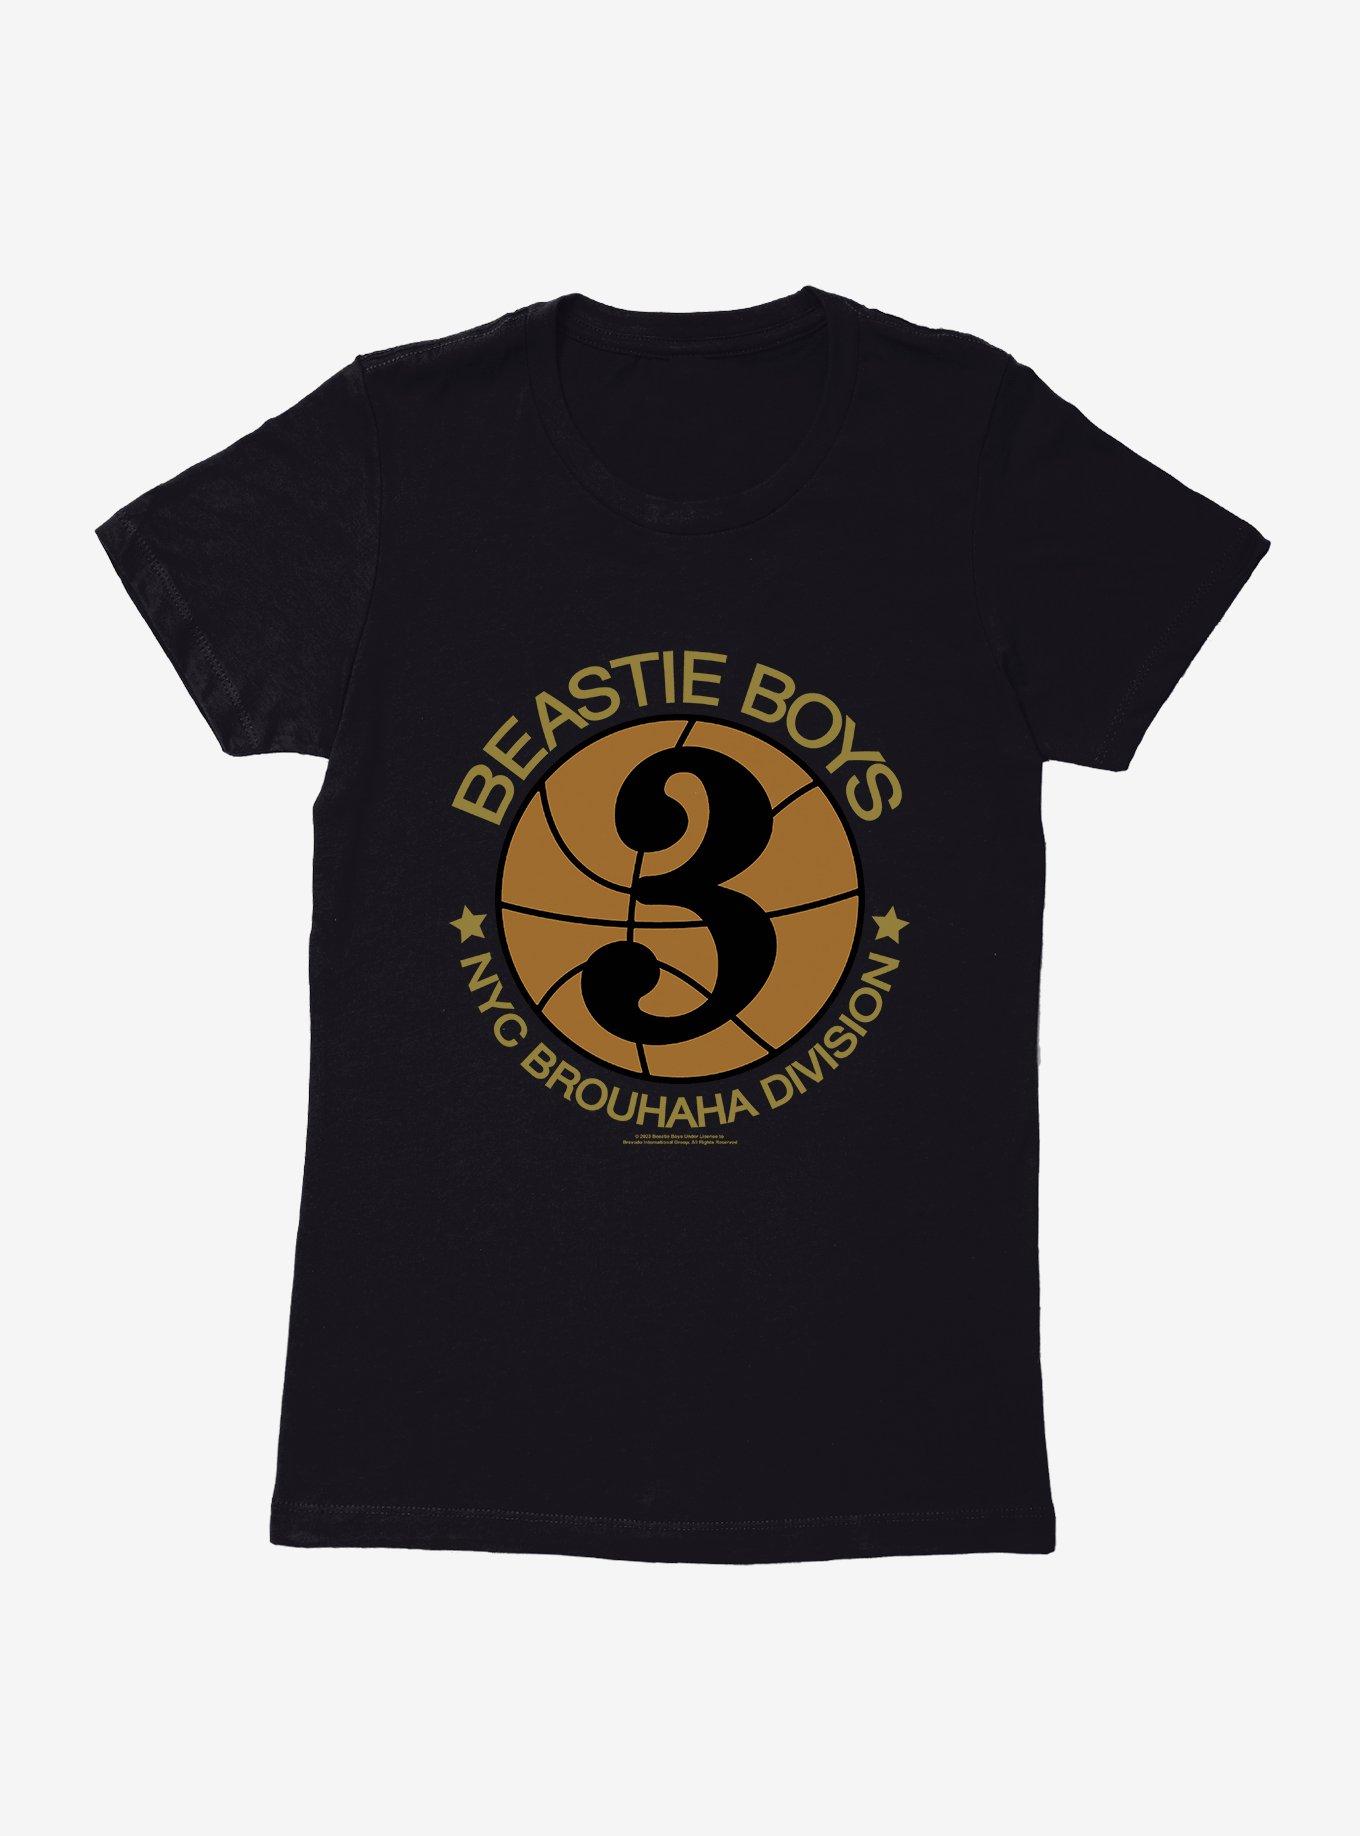 Beastie Boys NYC Brouhaha Division Womens T-Shirt, , hi-res